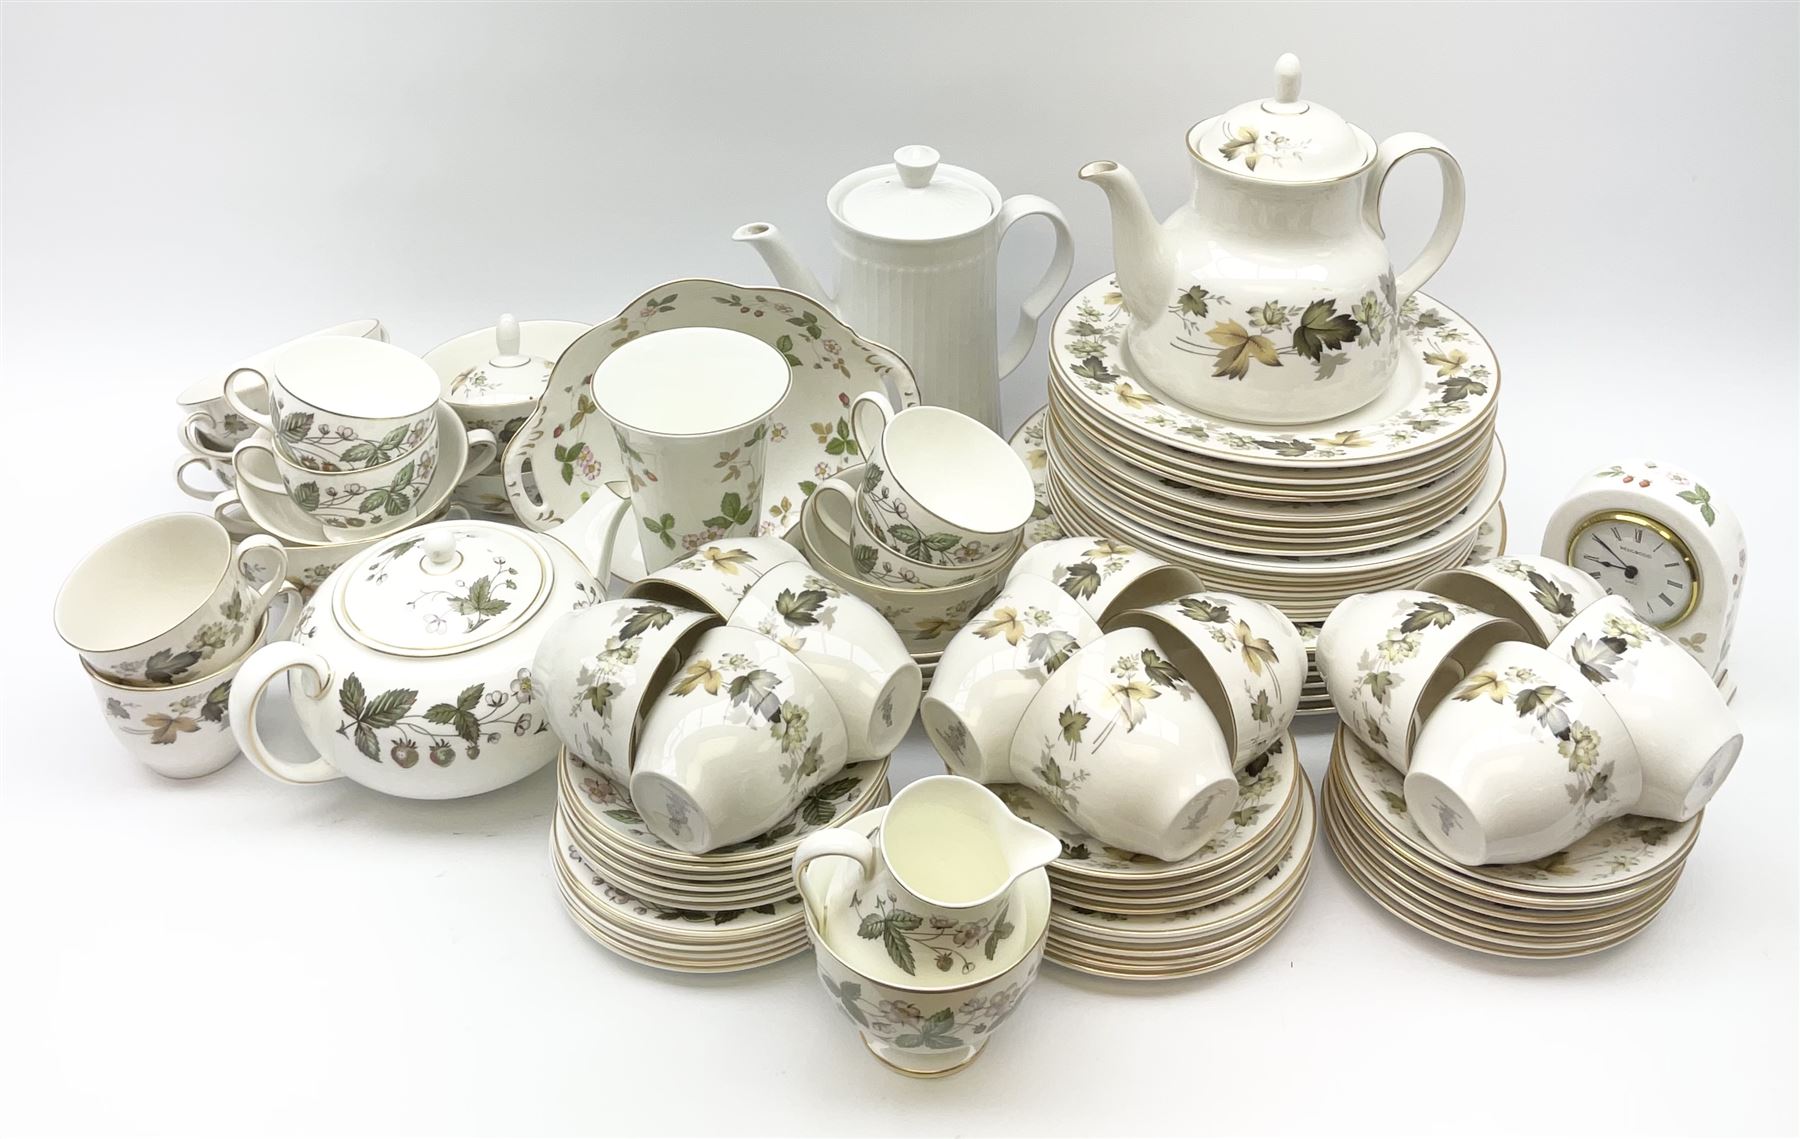 Royal Doulton Larchmont pattern tea and dinner wares